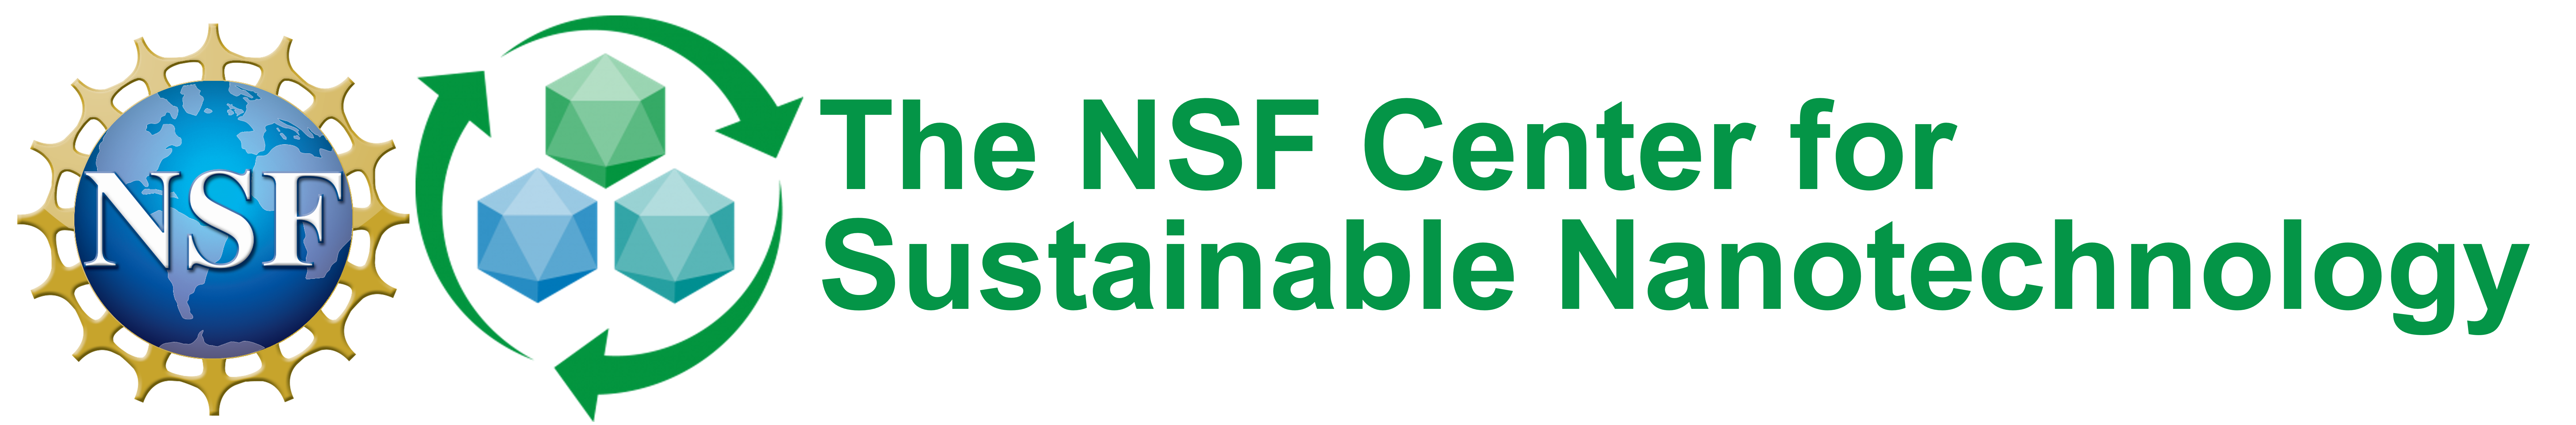 Left: blue globe logo of NSF. Right: green and blue logo of The Center for Sustainable Nanotechnology